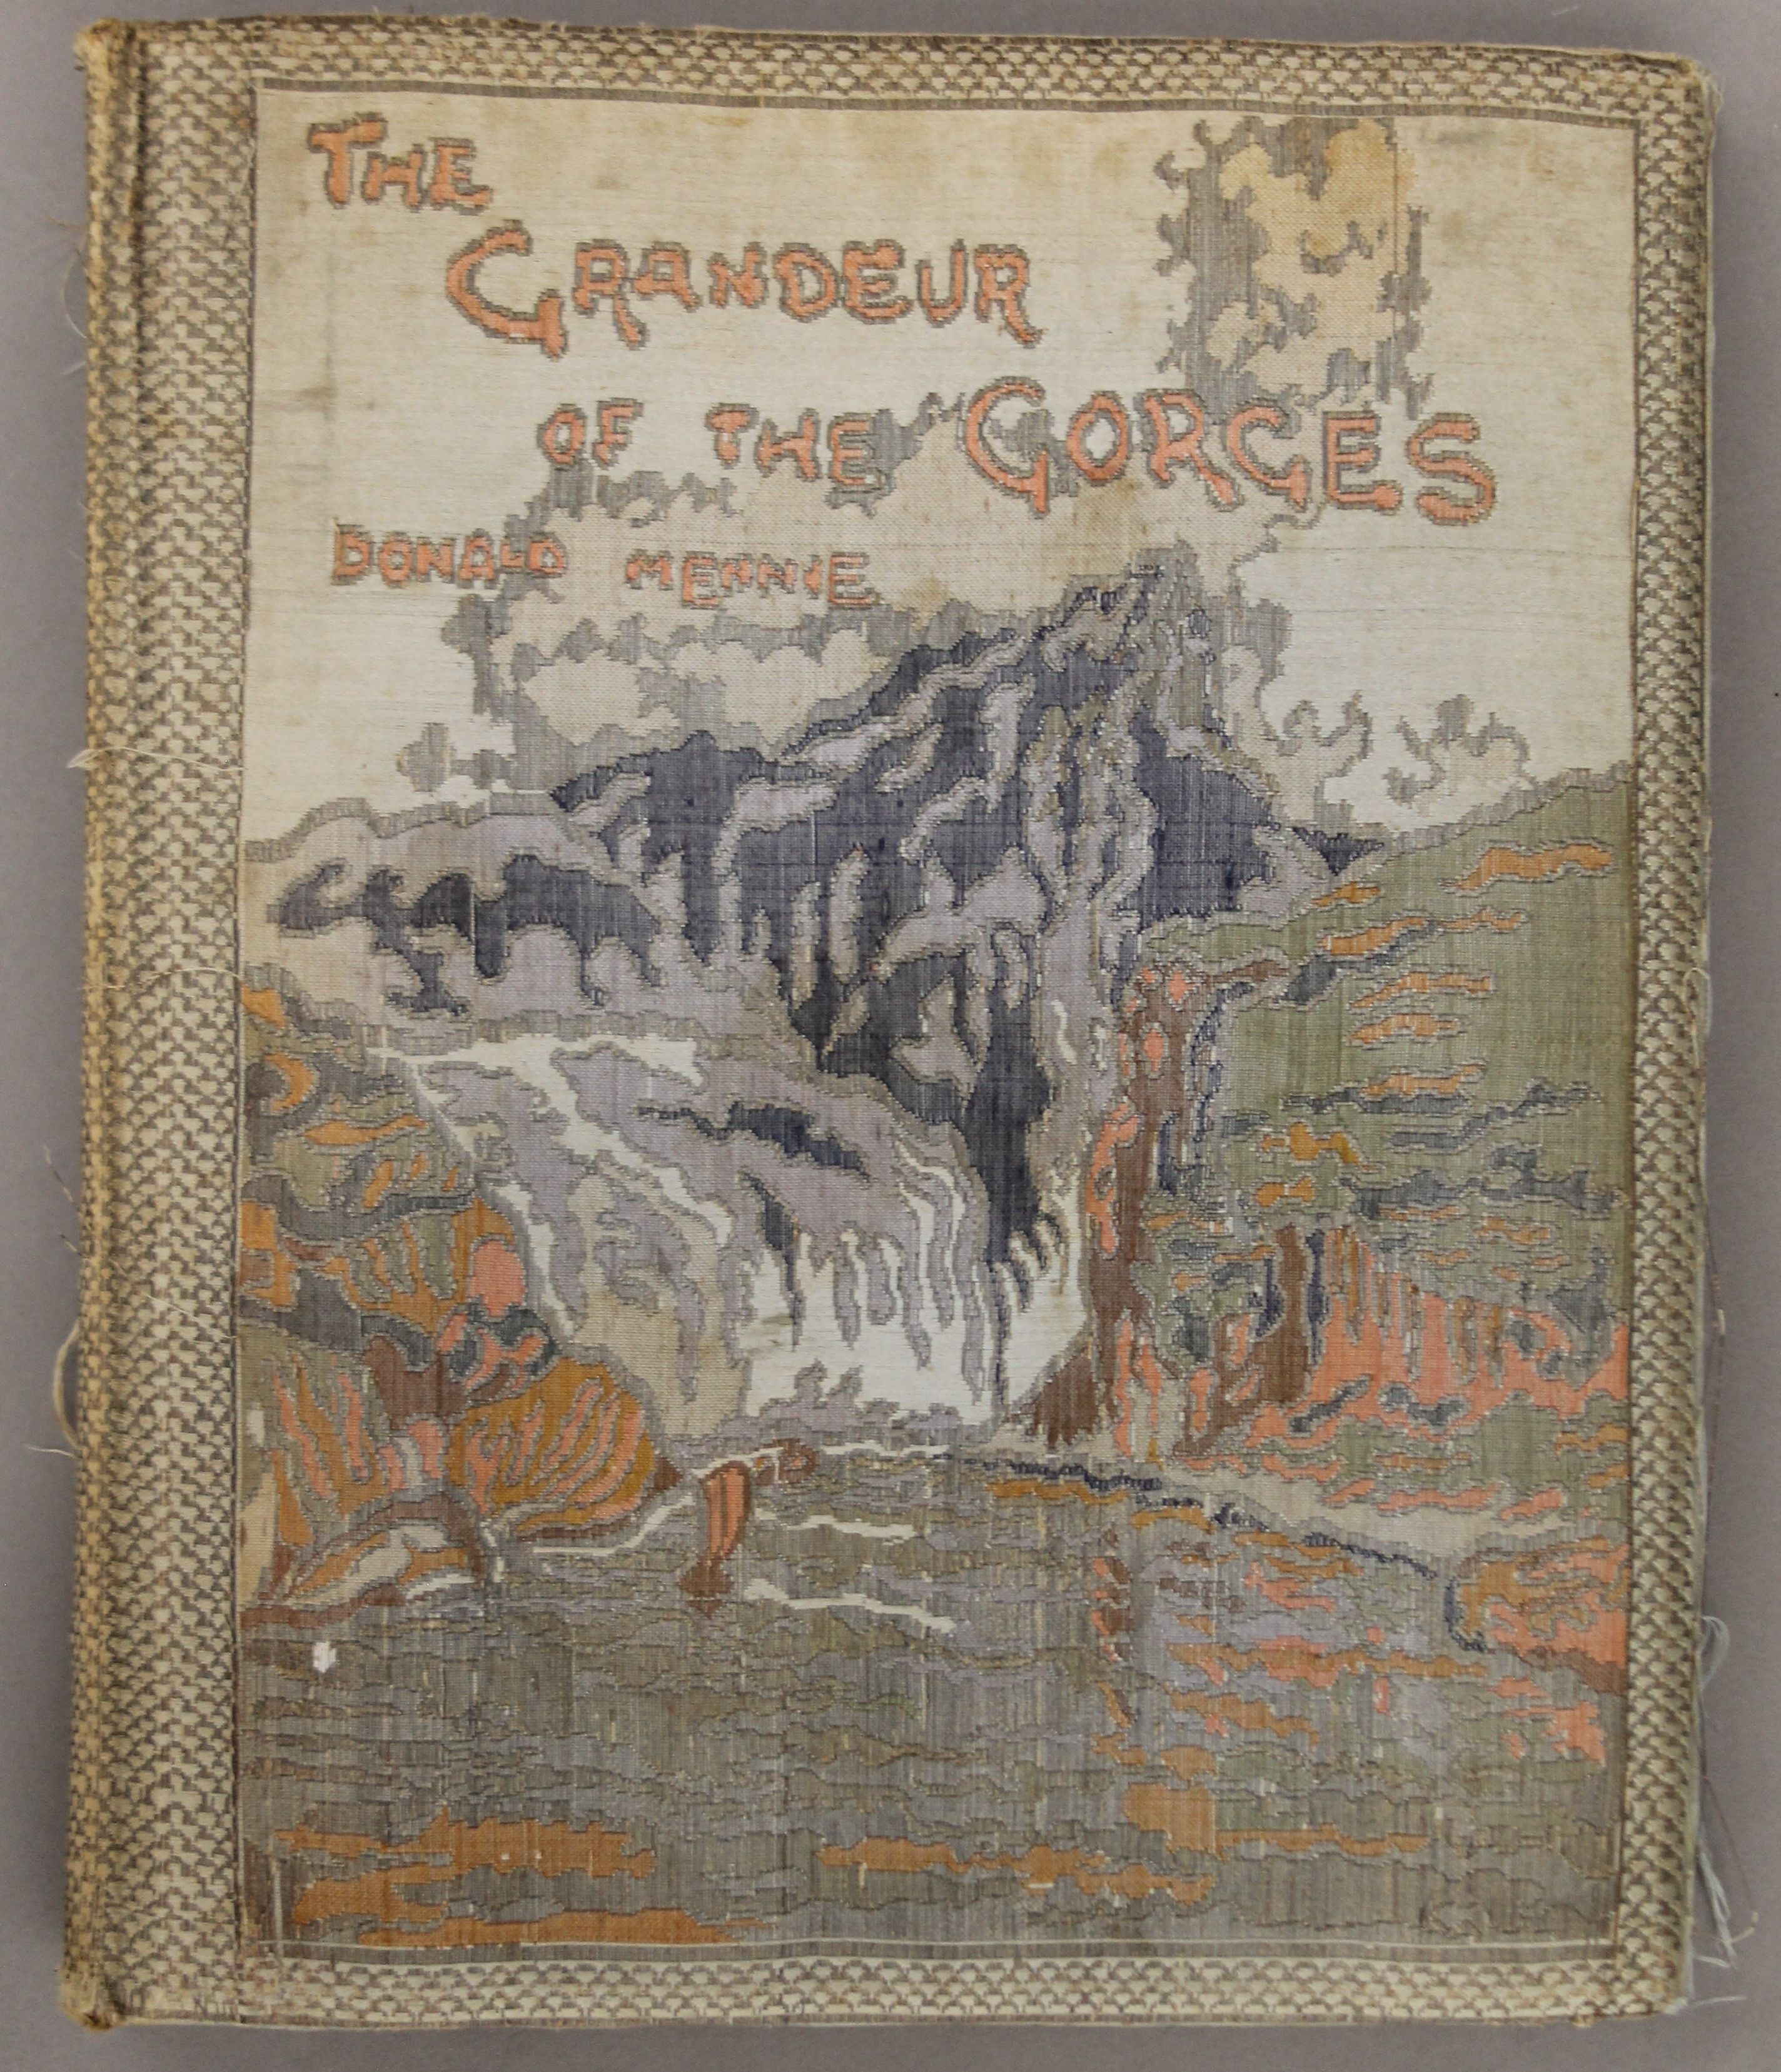 The Grandeur of the Gorges, 1926, from photographs by Donald Mennie, 1st edition, numbered 719/1000, - Image 3 of 11